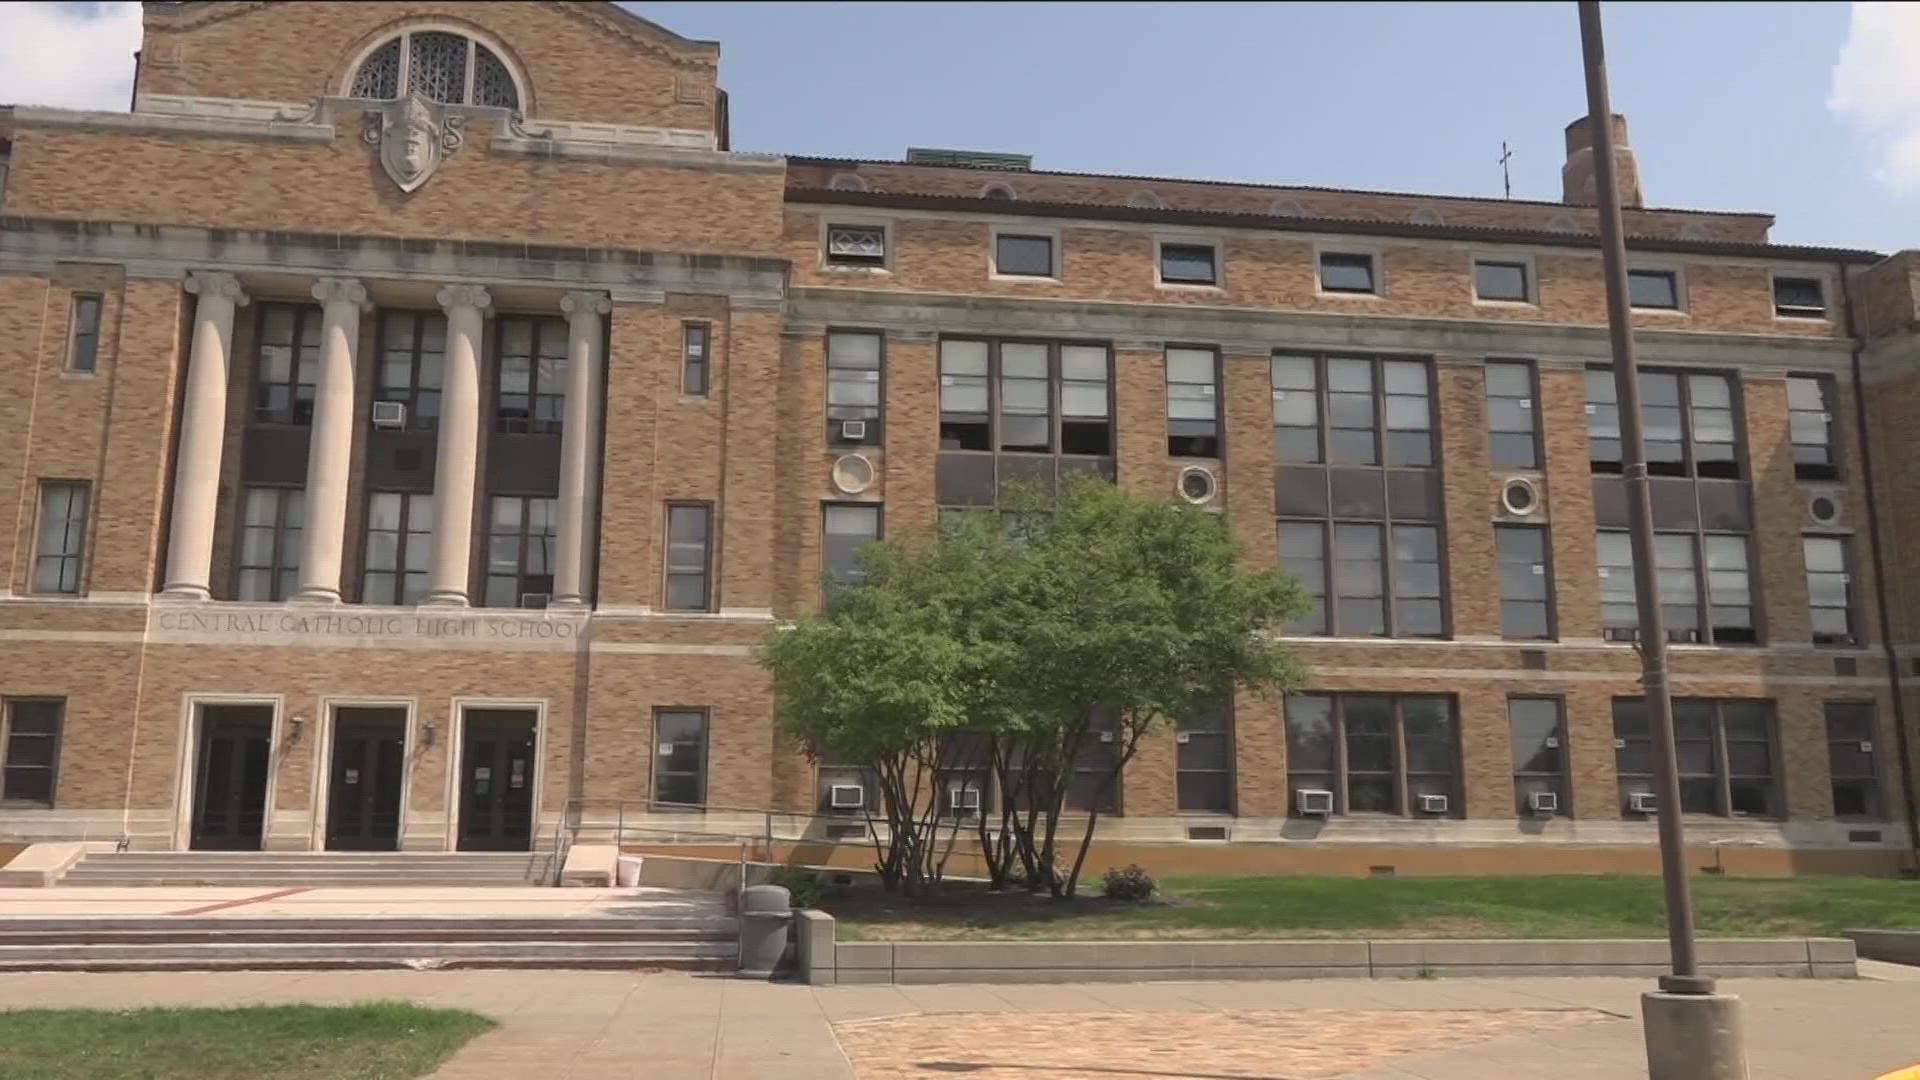 All classes at Central Catholic High School are canceled for Friday, May 26. Toledo police are investigating the alleged threat.